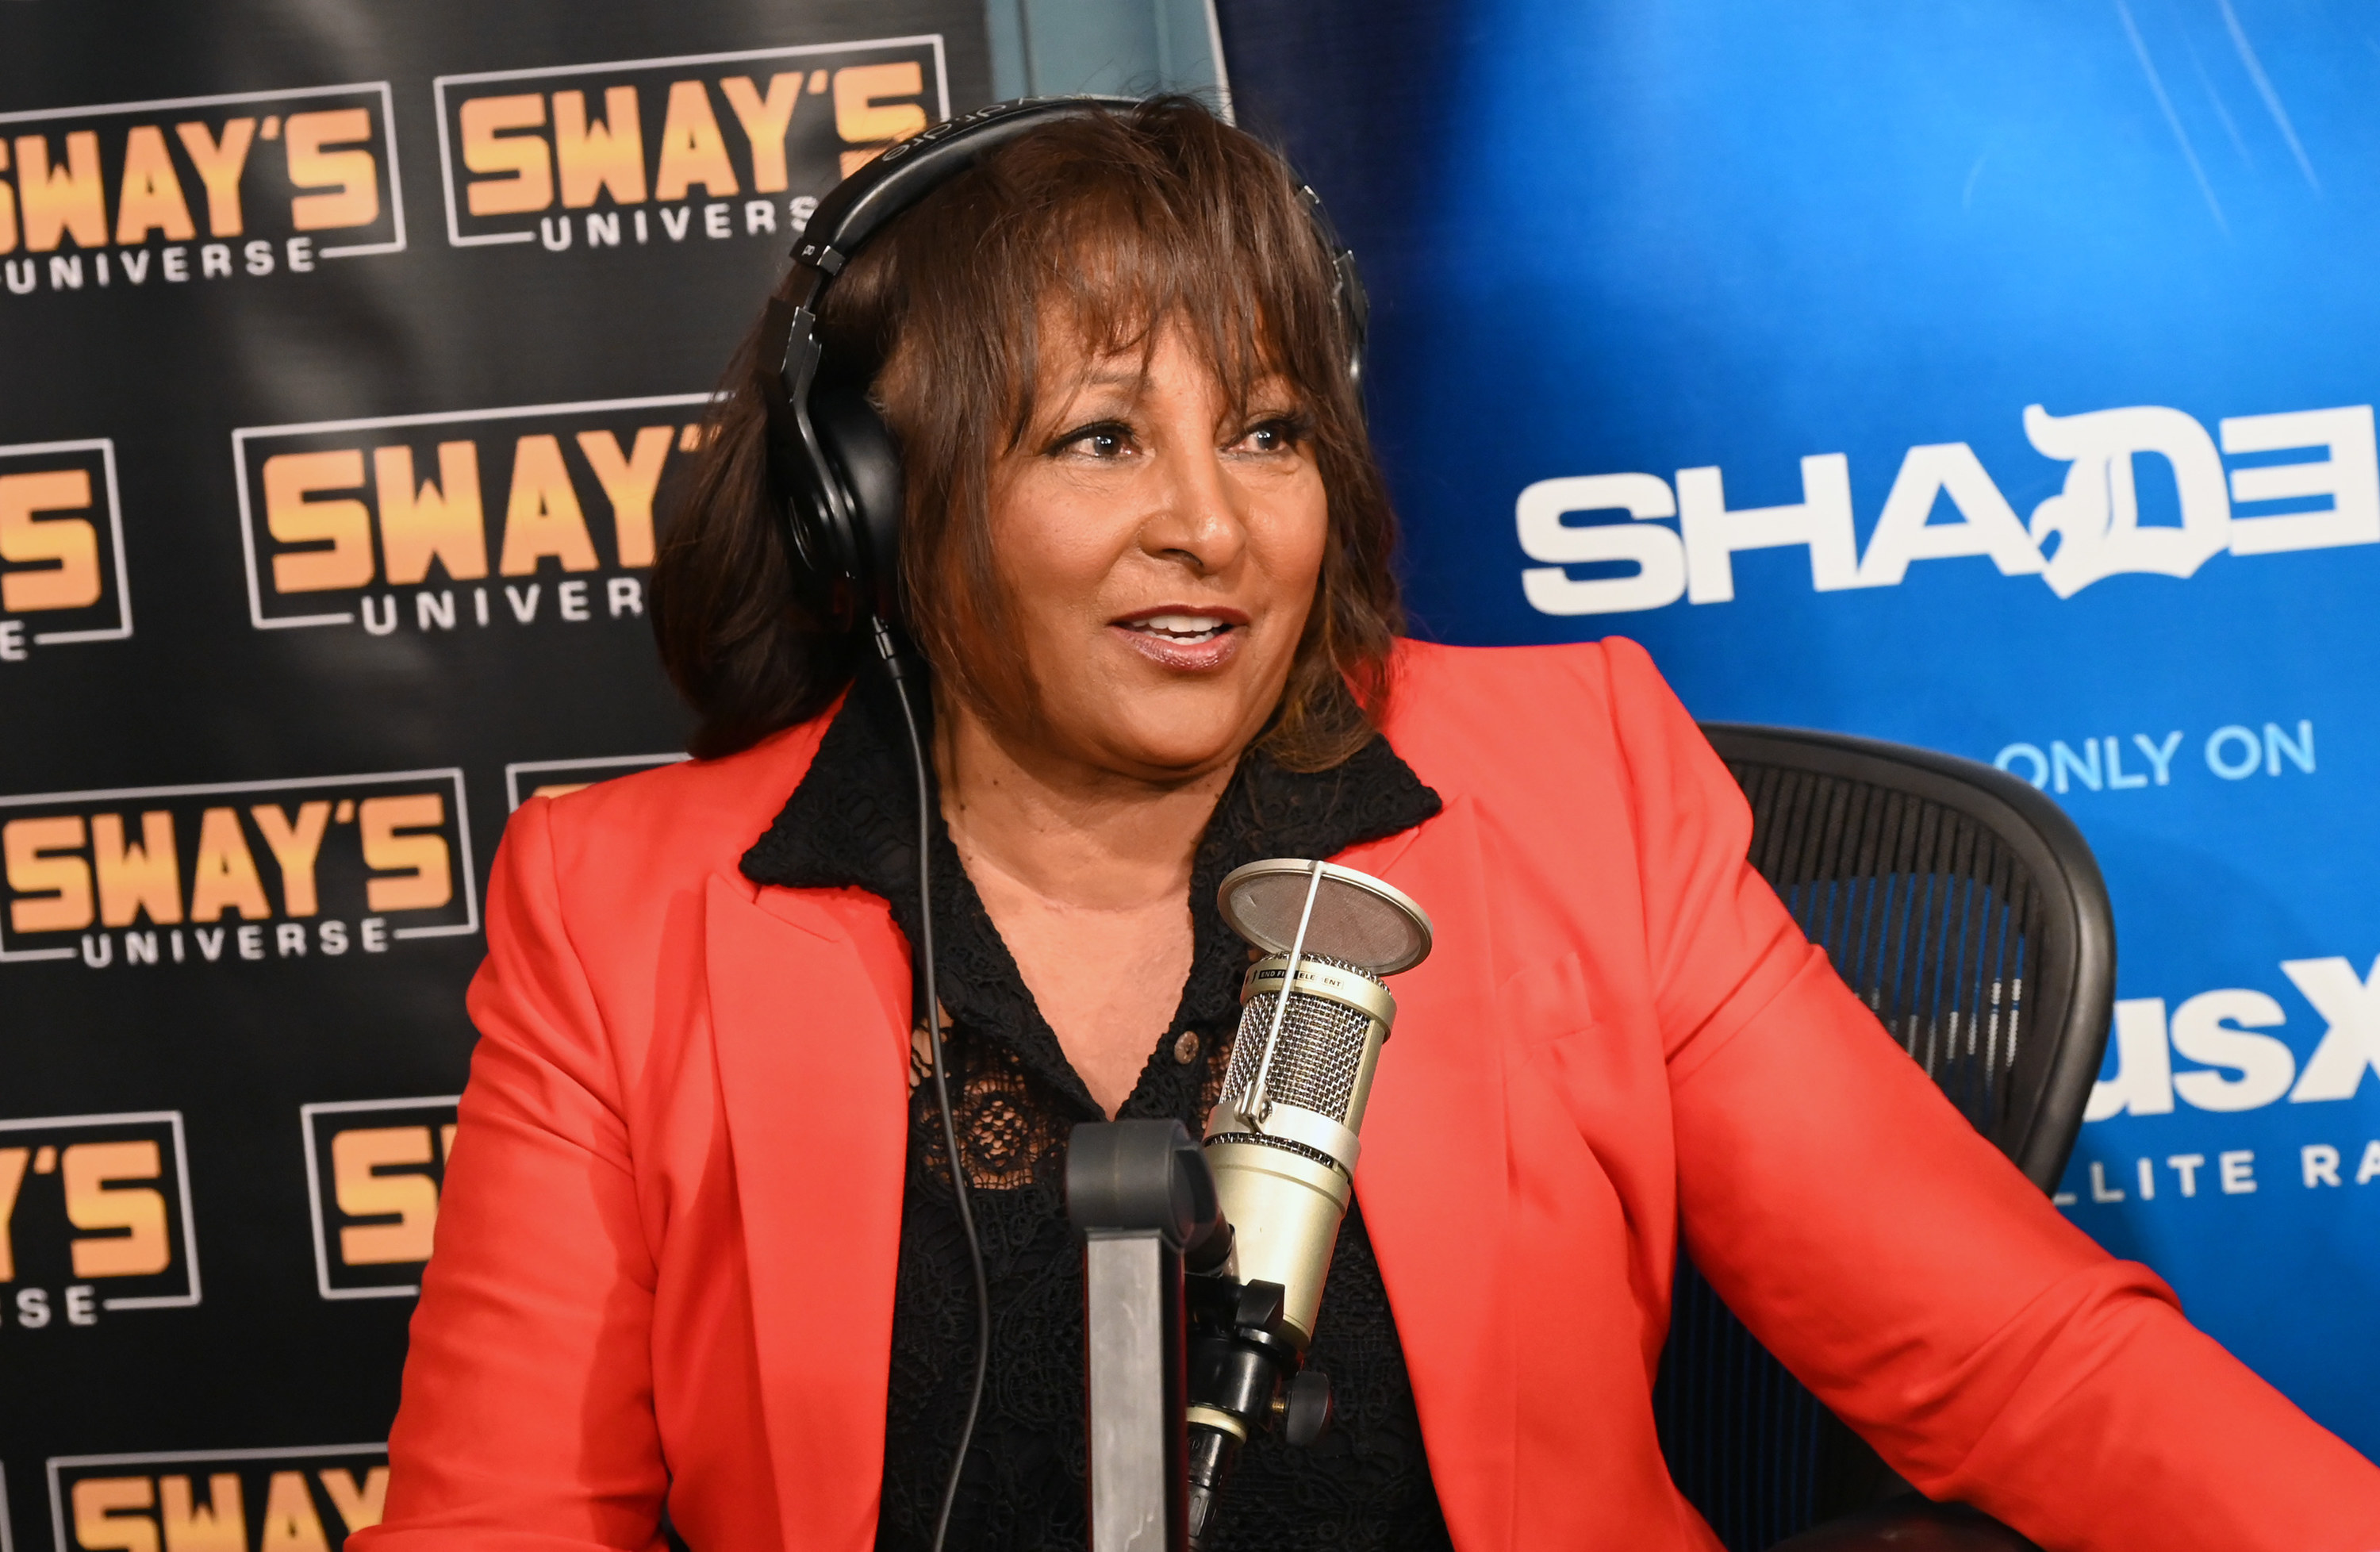 pam grier wearing a black shirt and orange blazer talking into a microphone